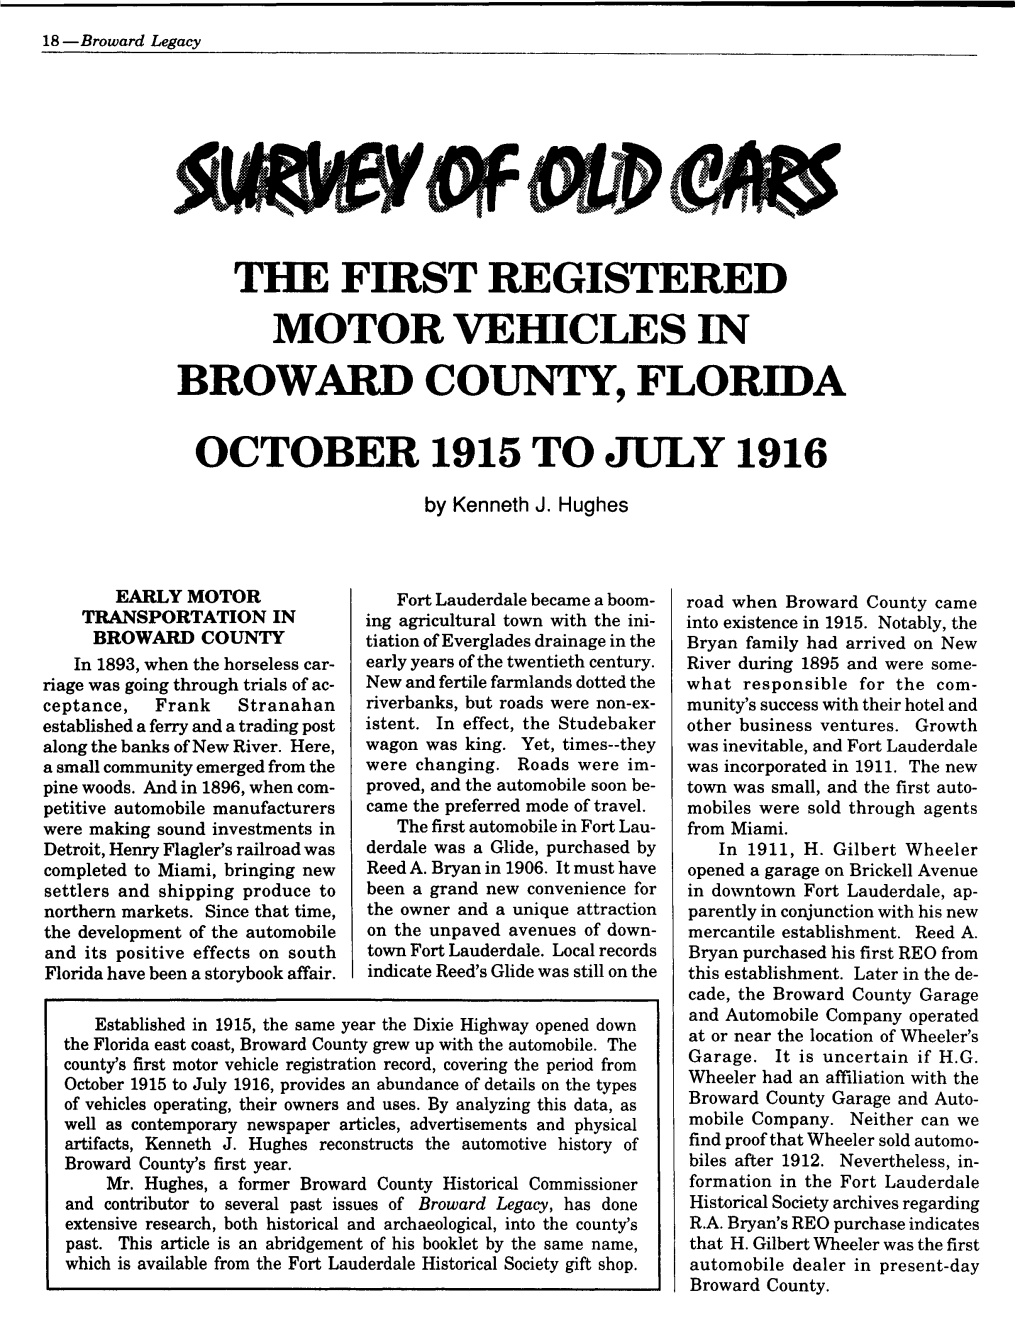 THE FIRST REGISTERED MOTOR VEHICLES in BROWARD COUNTY, FLORIDA OCTOBER 1915 to July 1916 by Kenneth J